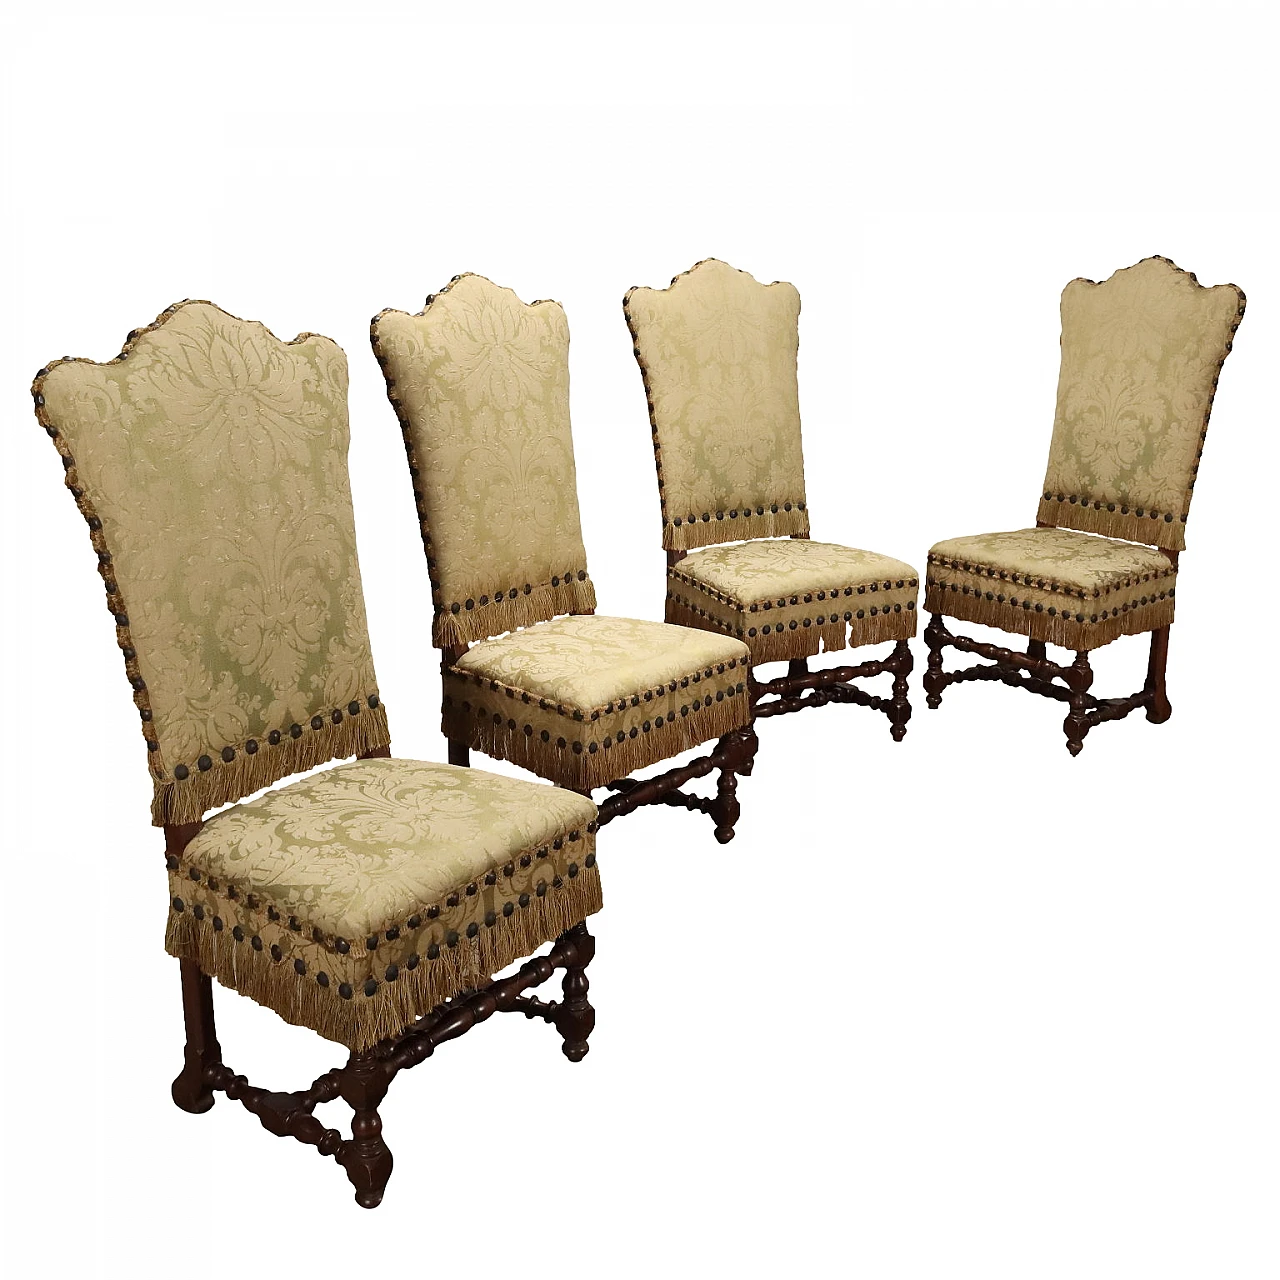 4 Wooden chairs with bobbin legs and brocade fabric, 19th century 1